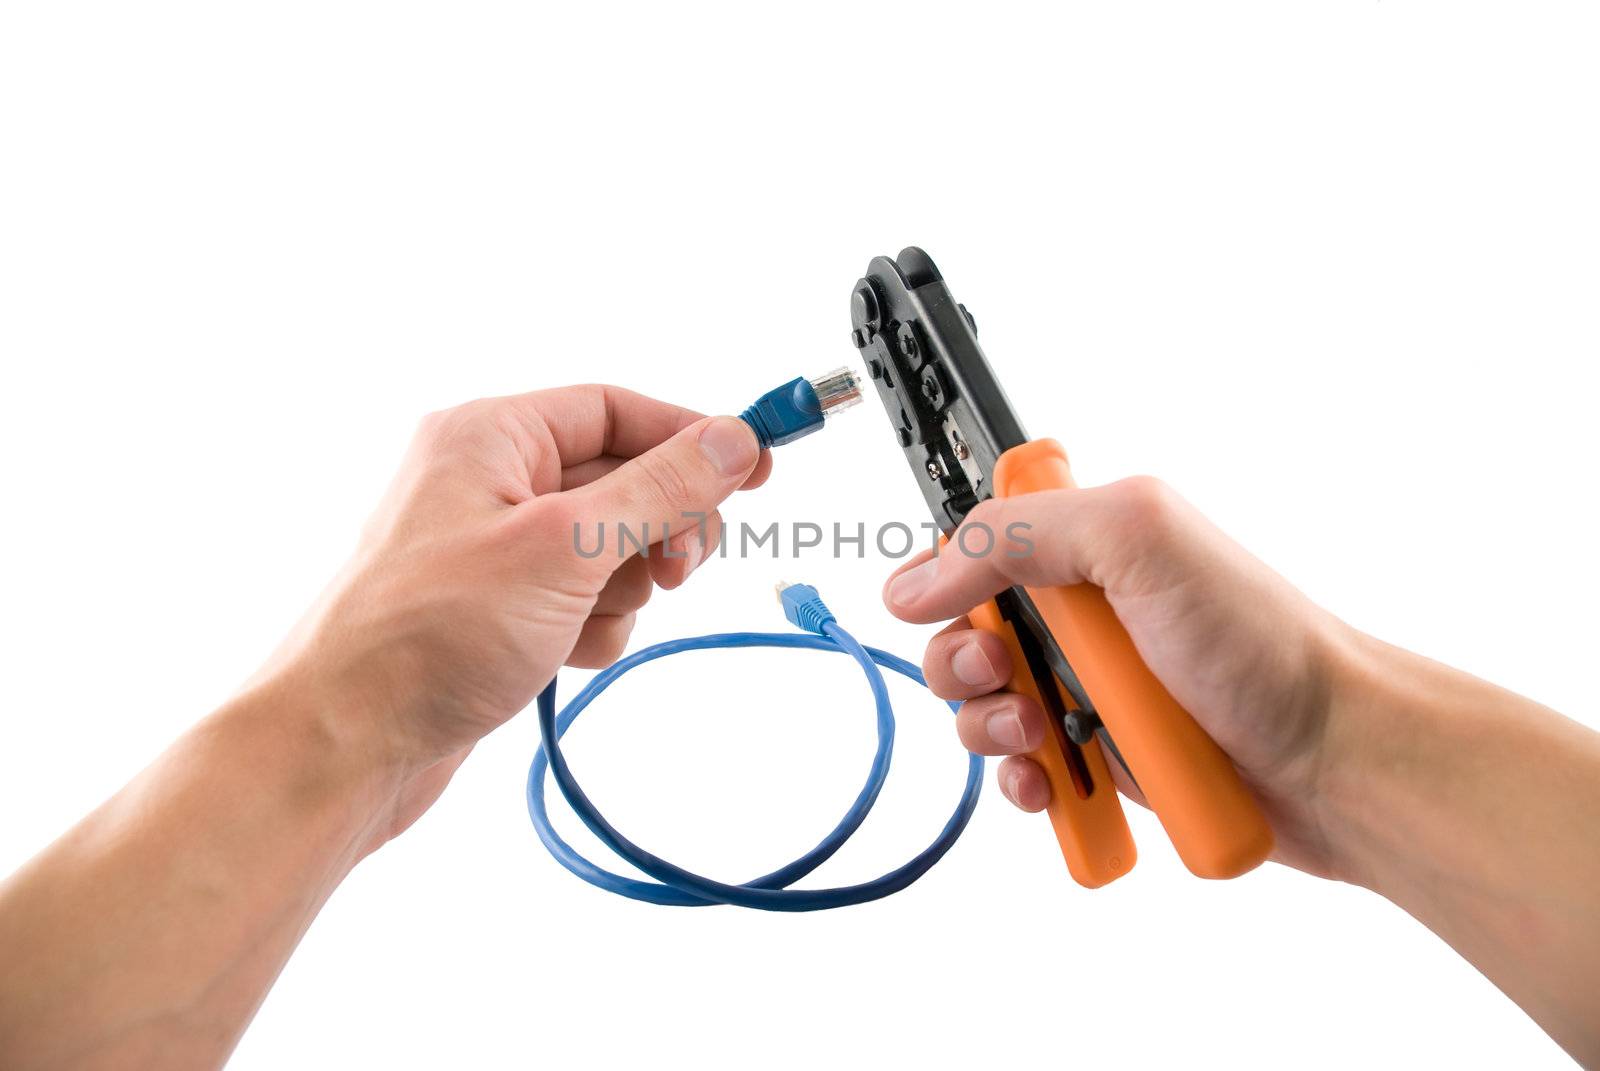 UTP patch tool in hands with wire, isolated white